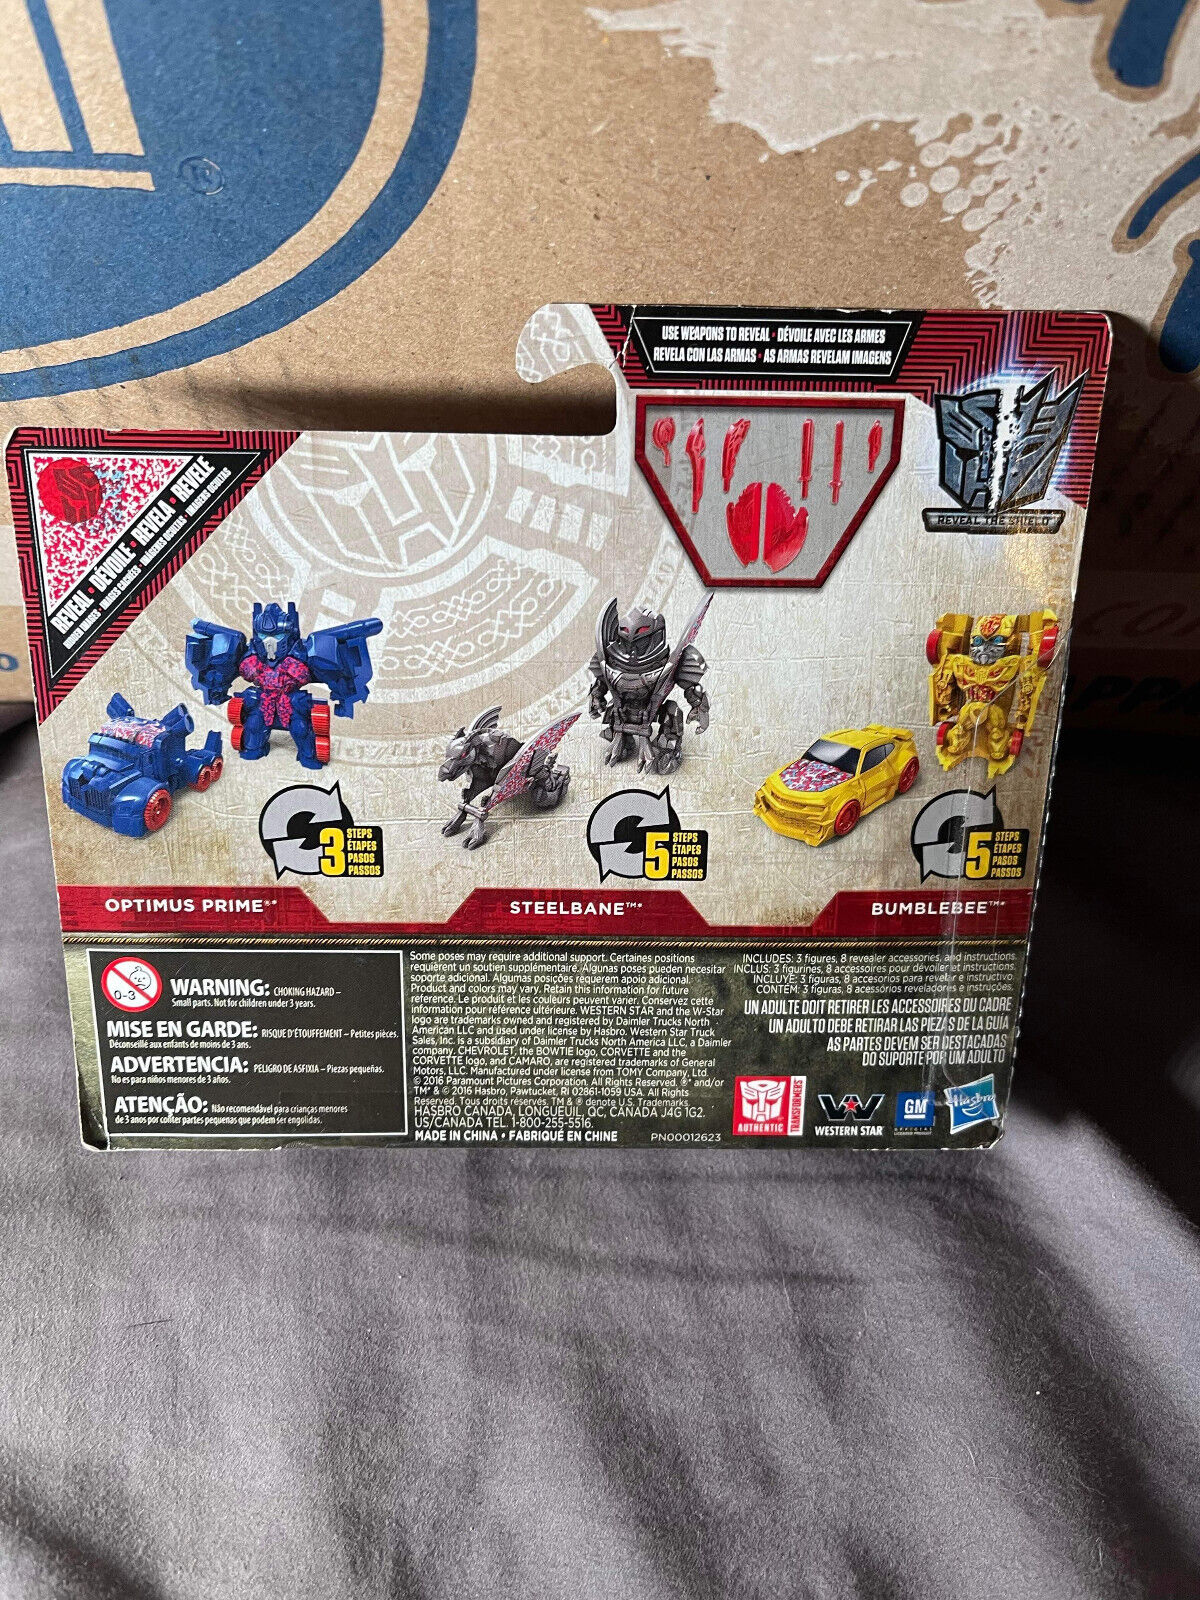 Hasbro TRANSFORMERS Last Knight Tiny Turbo Changers Target Exclusive